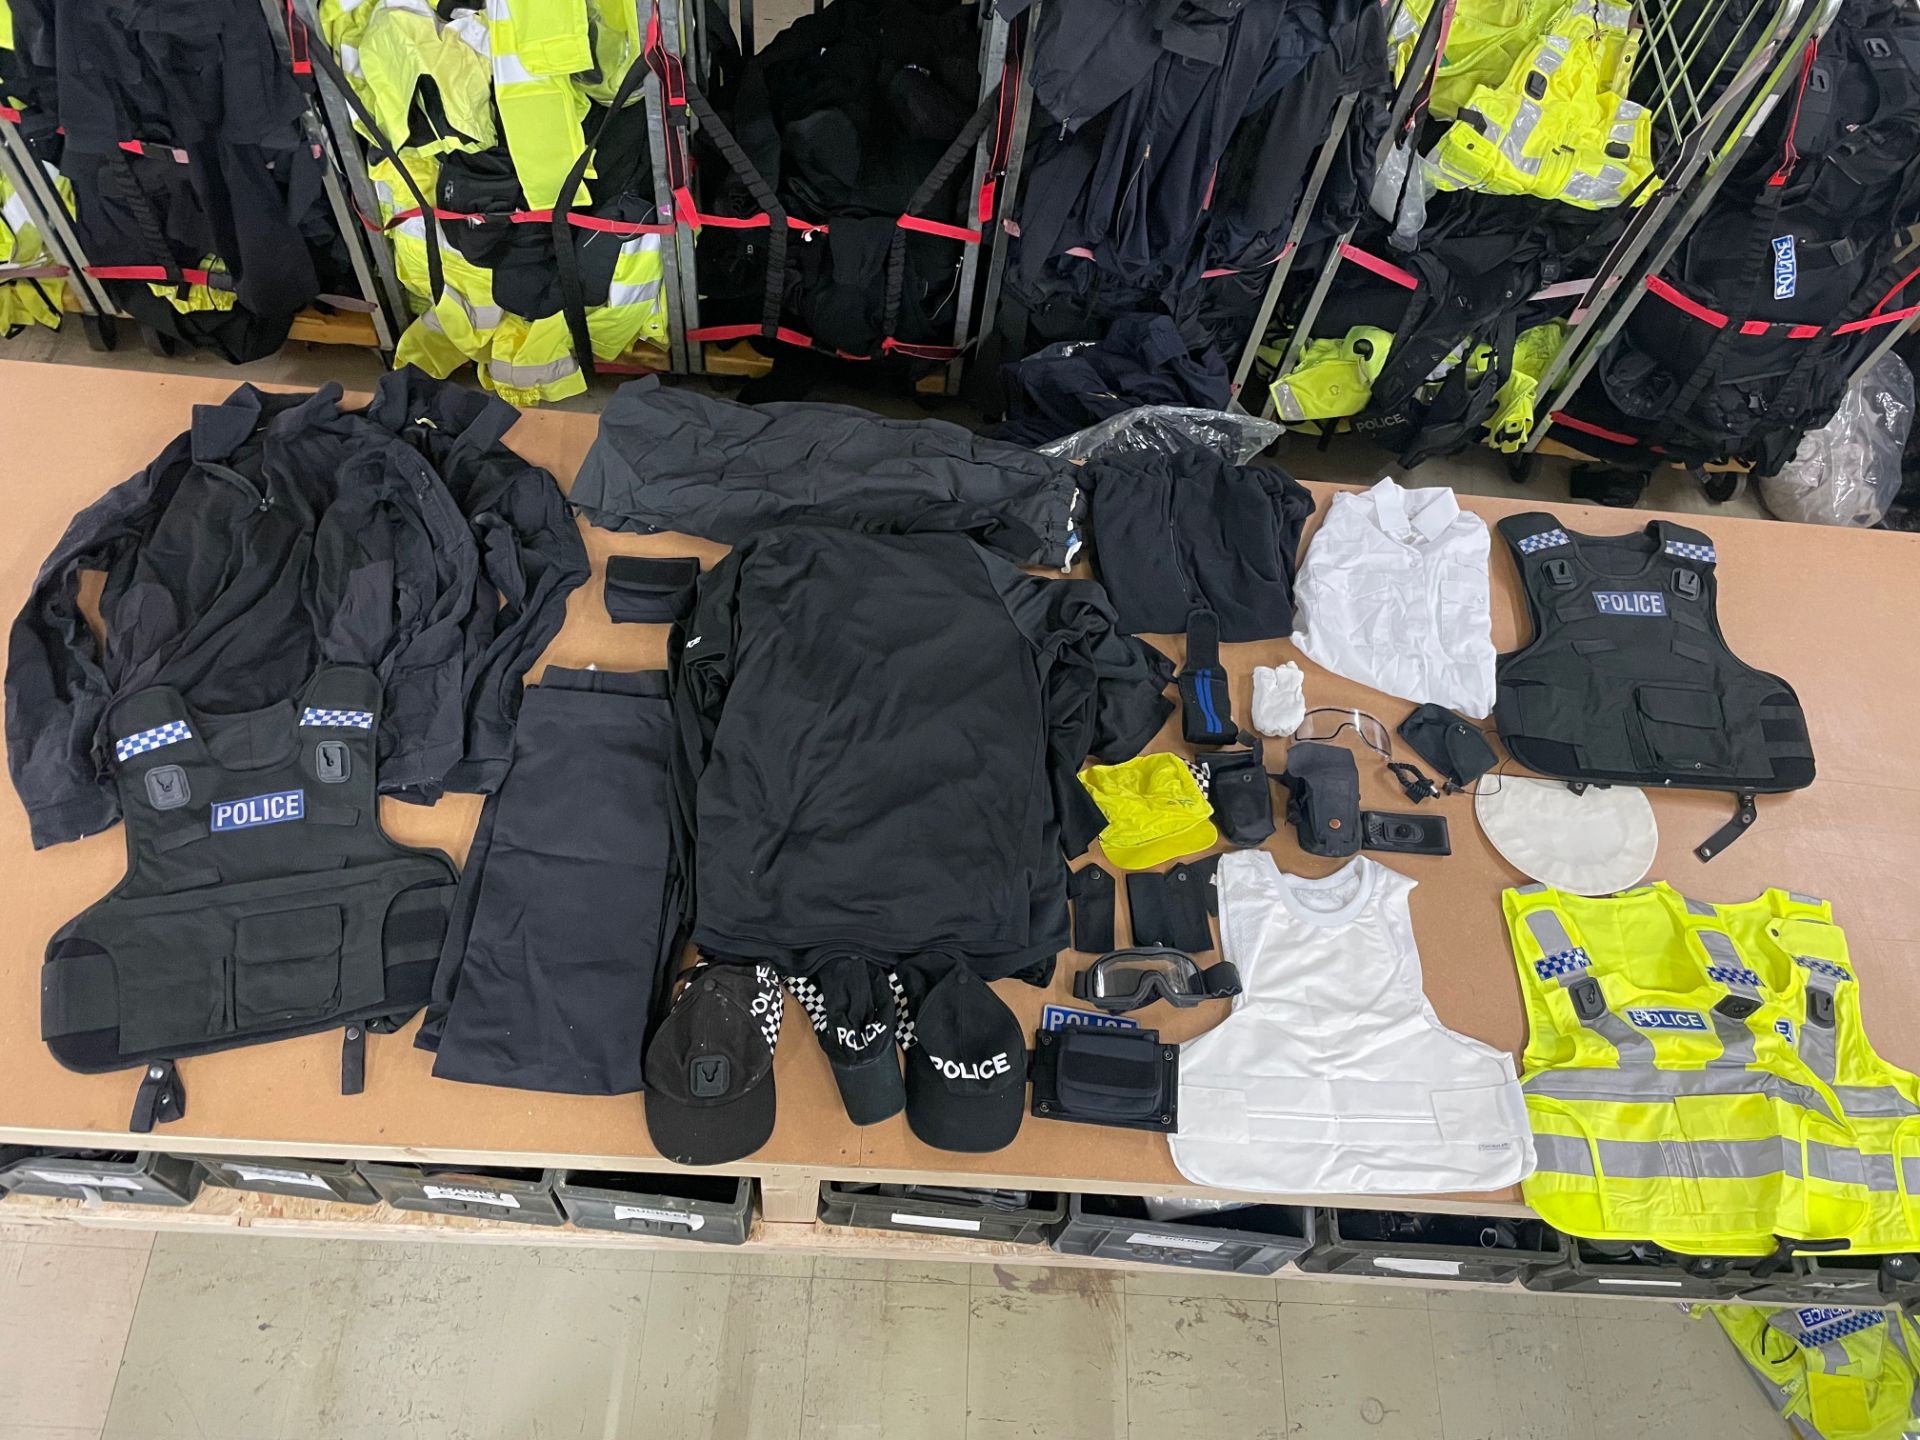 20 X BAGS FULL TO THE BRIM WITH POLICE CLOTHING & ACCESSORIES - RRP £5500.00 - NO VAT ON HAMMER - Image 9 of 12